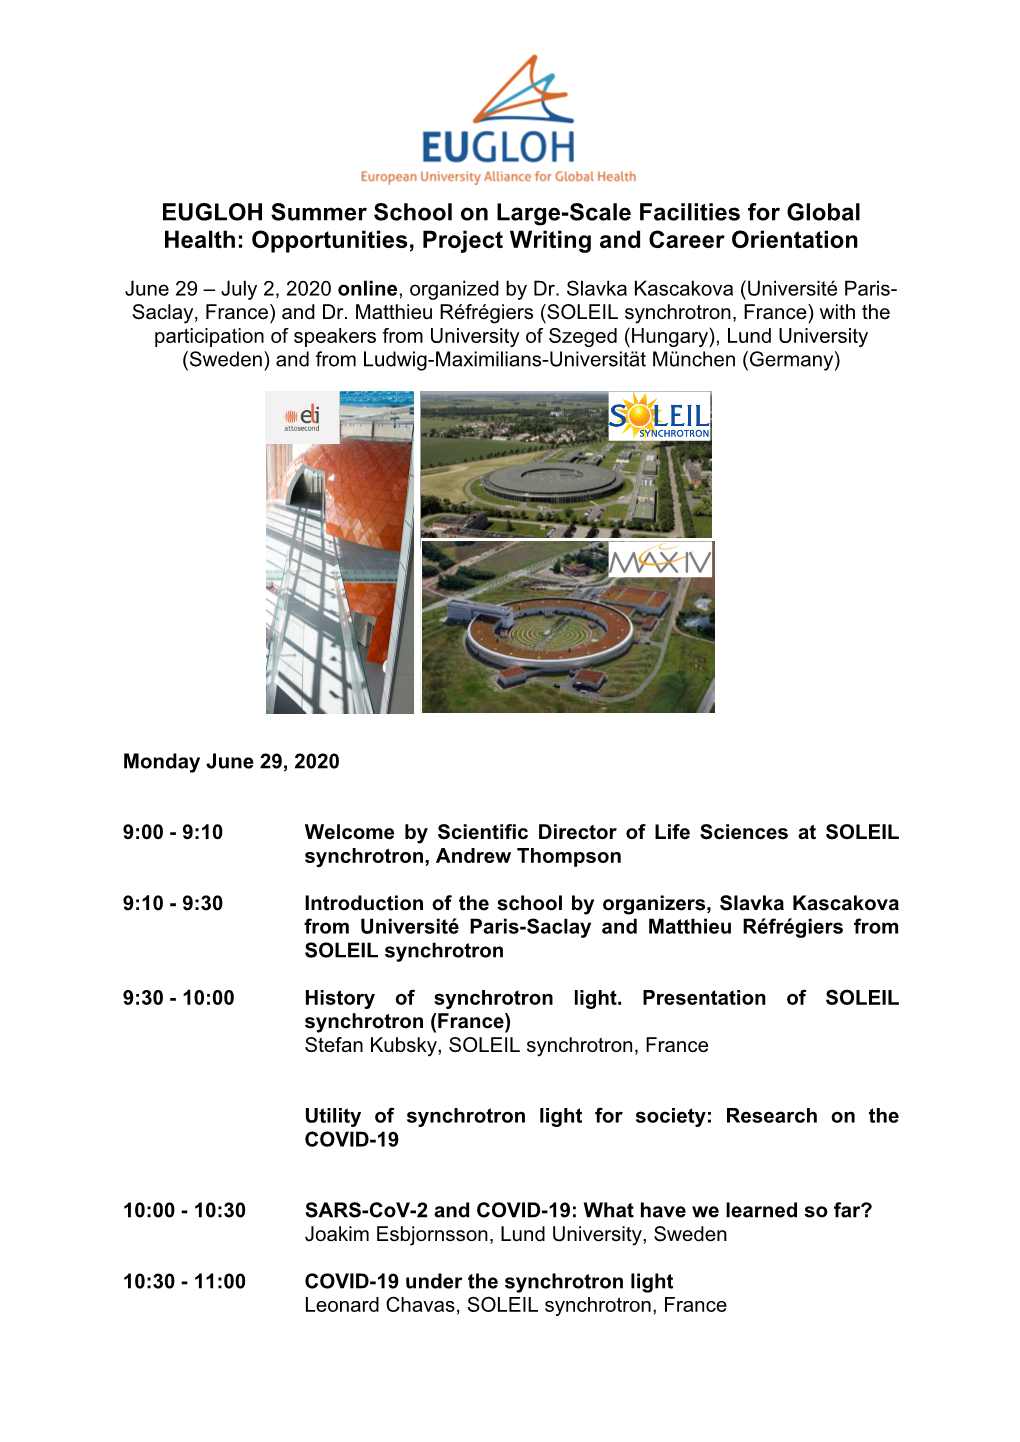 EUGLOH Summer School on Large-Scale Facilities for Global Health: Opportunities, Project Writing and Career Orientation